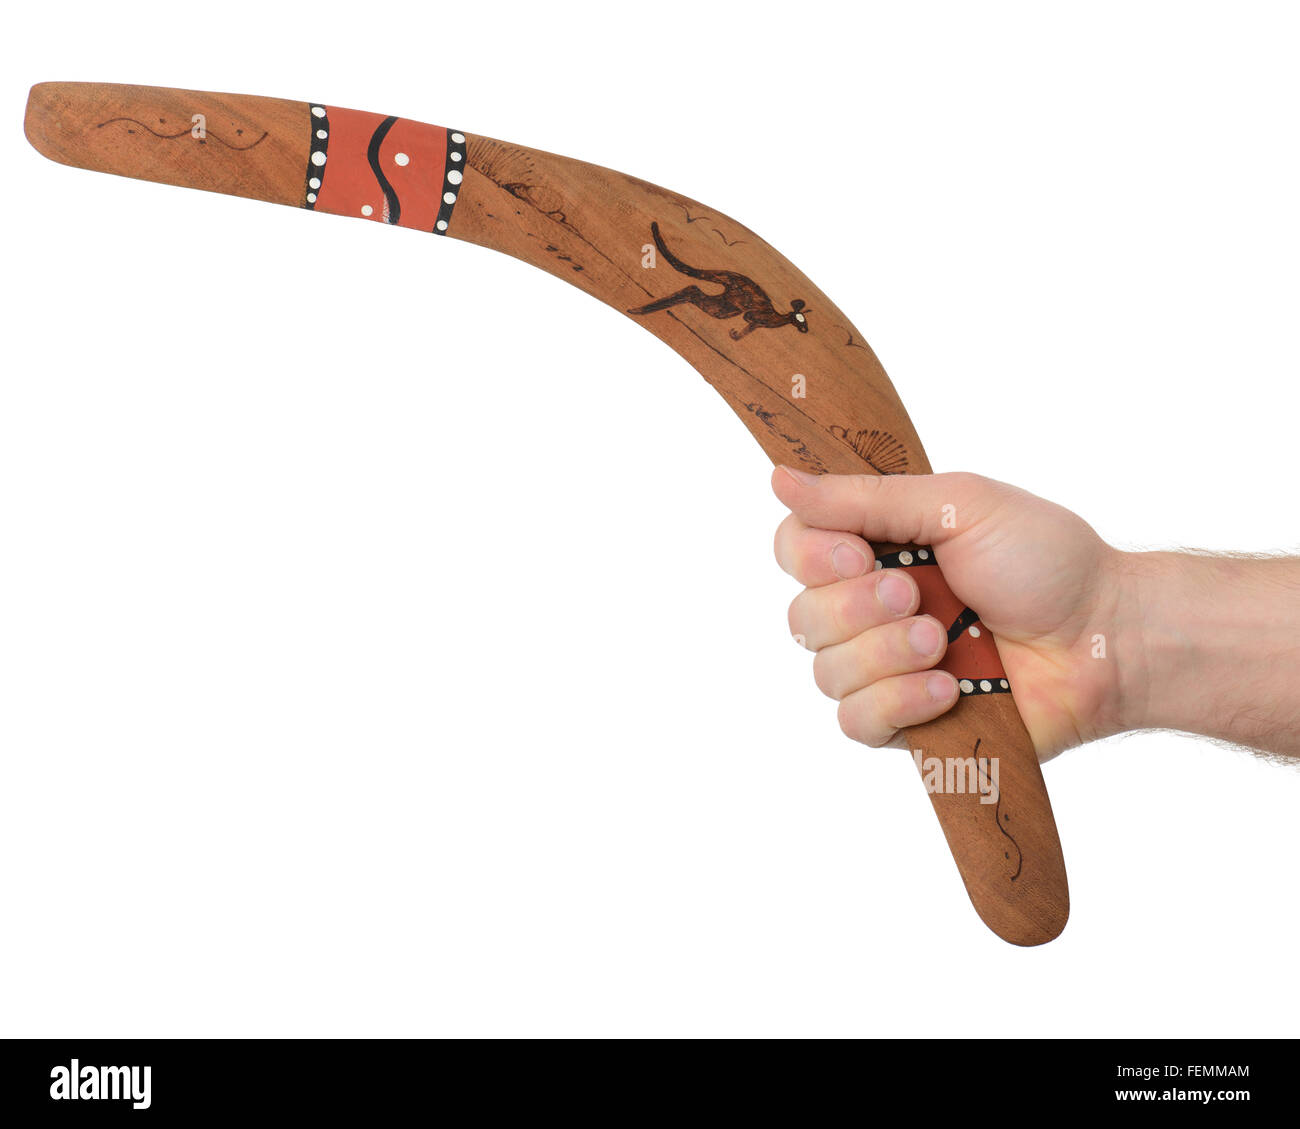 Hand holding a boomerang isolated on a white background Stock Photo